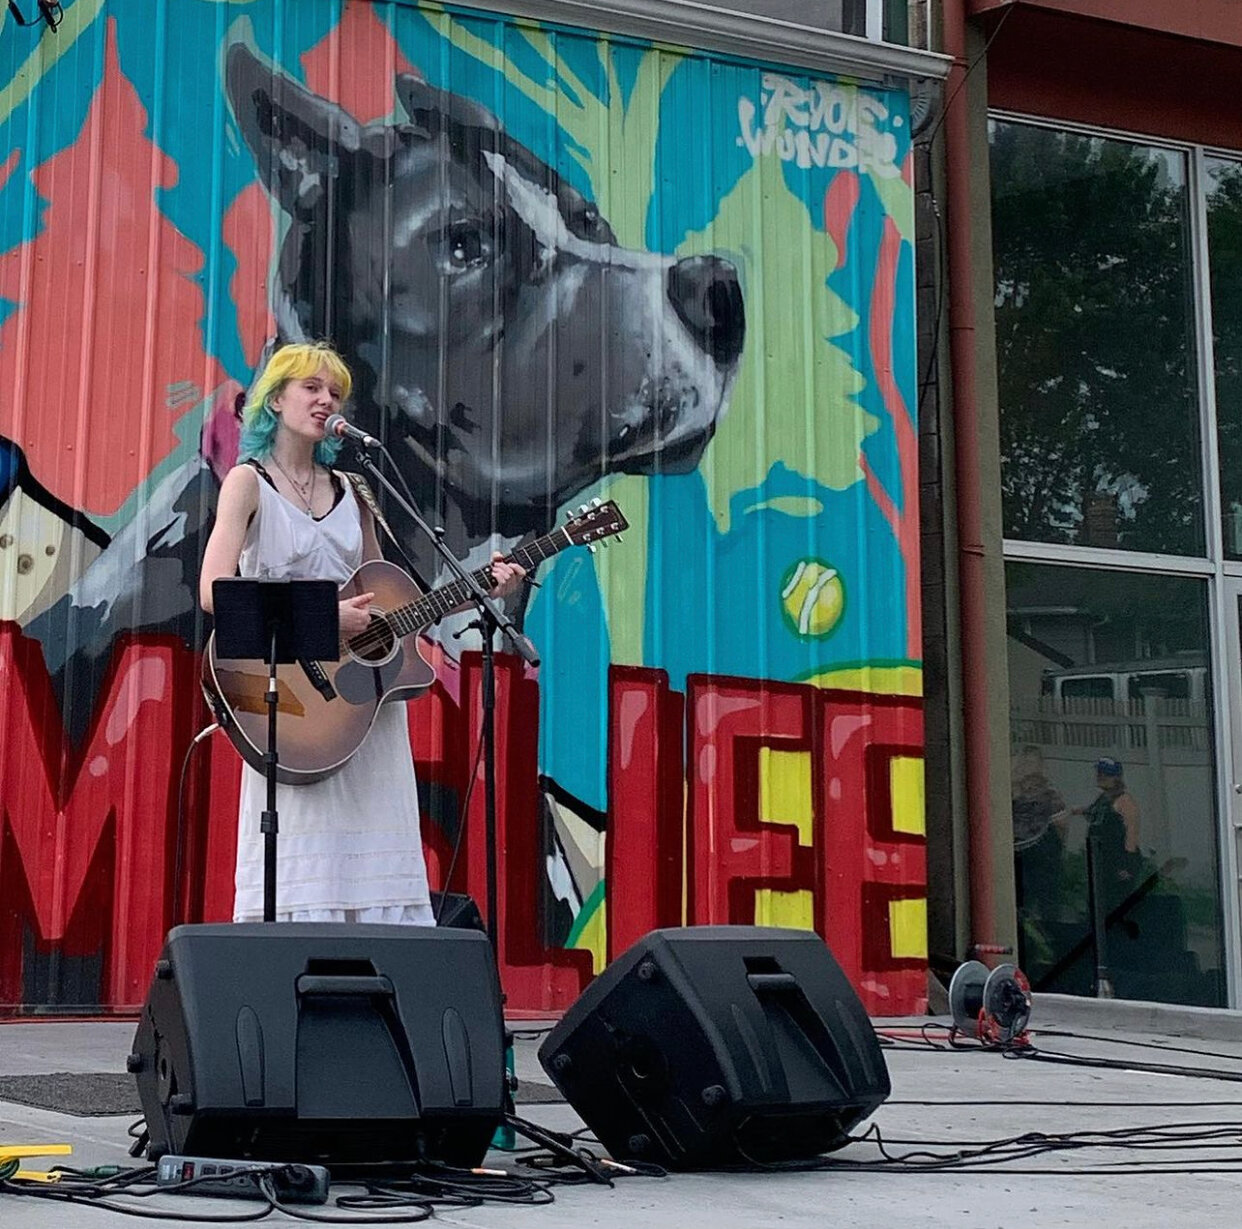 Local musician Josie Hasnik known as FINICK was one of four artists who performed at the opening concert behind Nokomis Tattoo on Friday evening, Aug. 4, 2023.